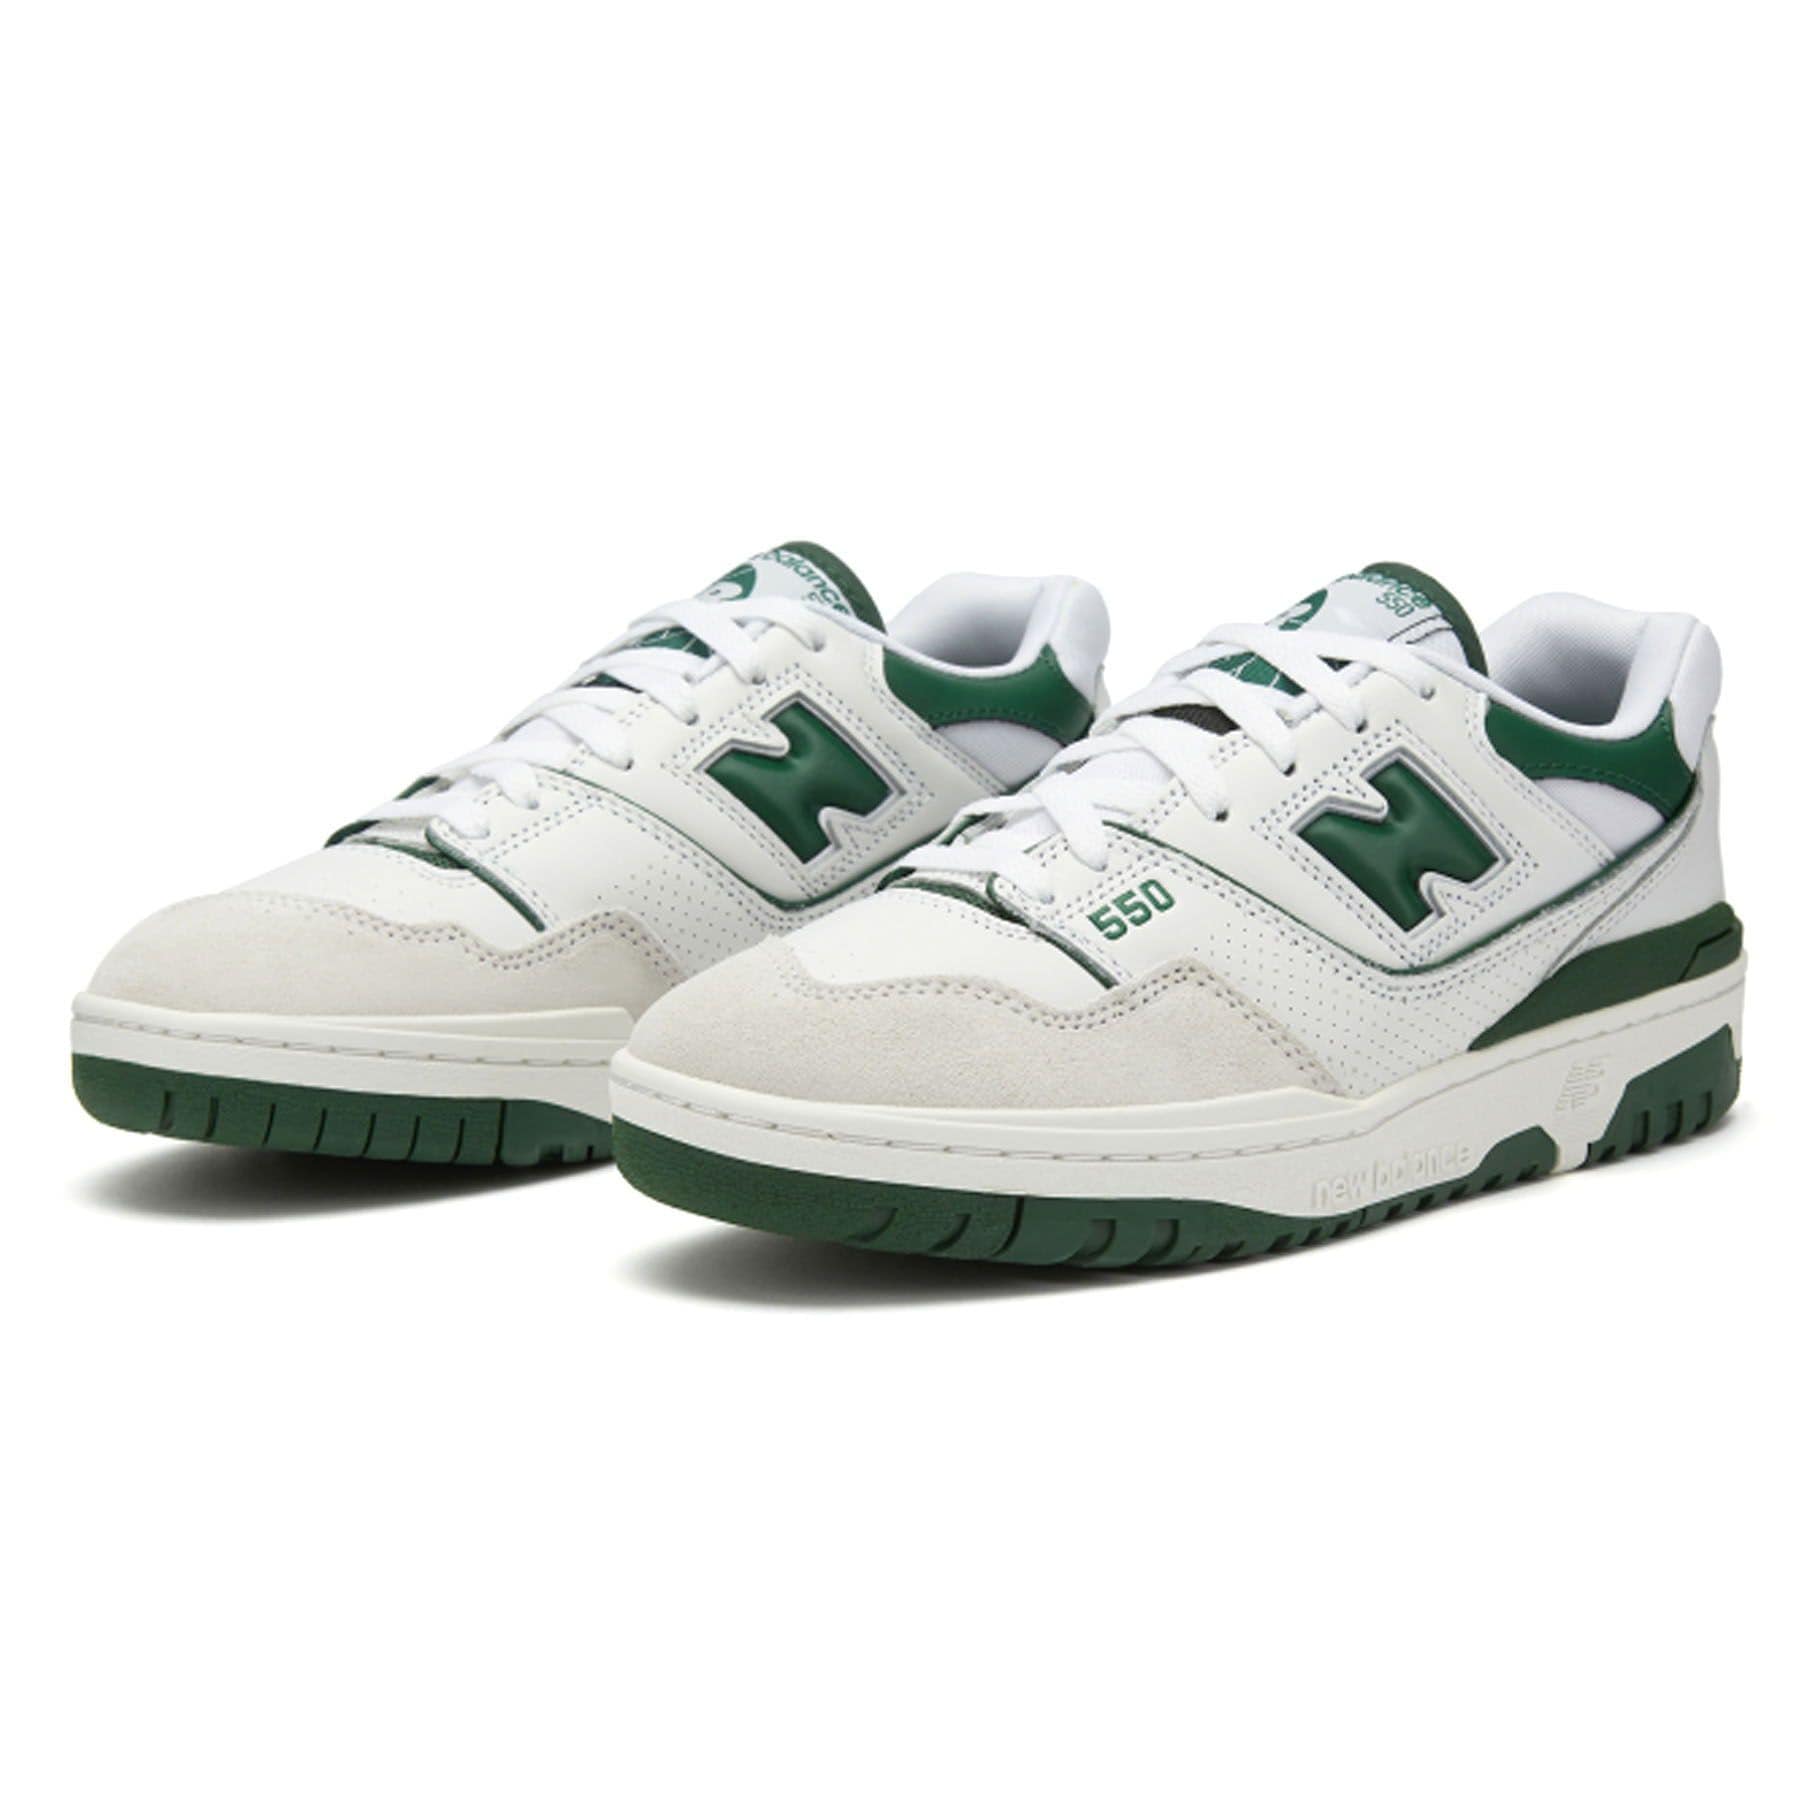 New Balance 550 sneakers in white with green detail